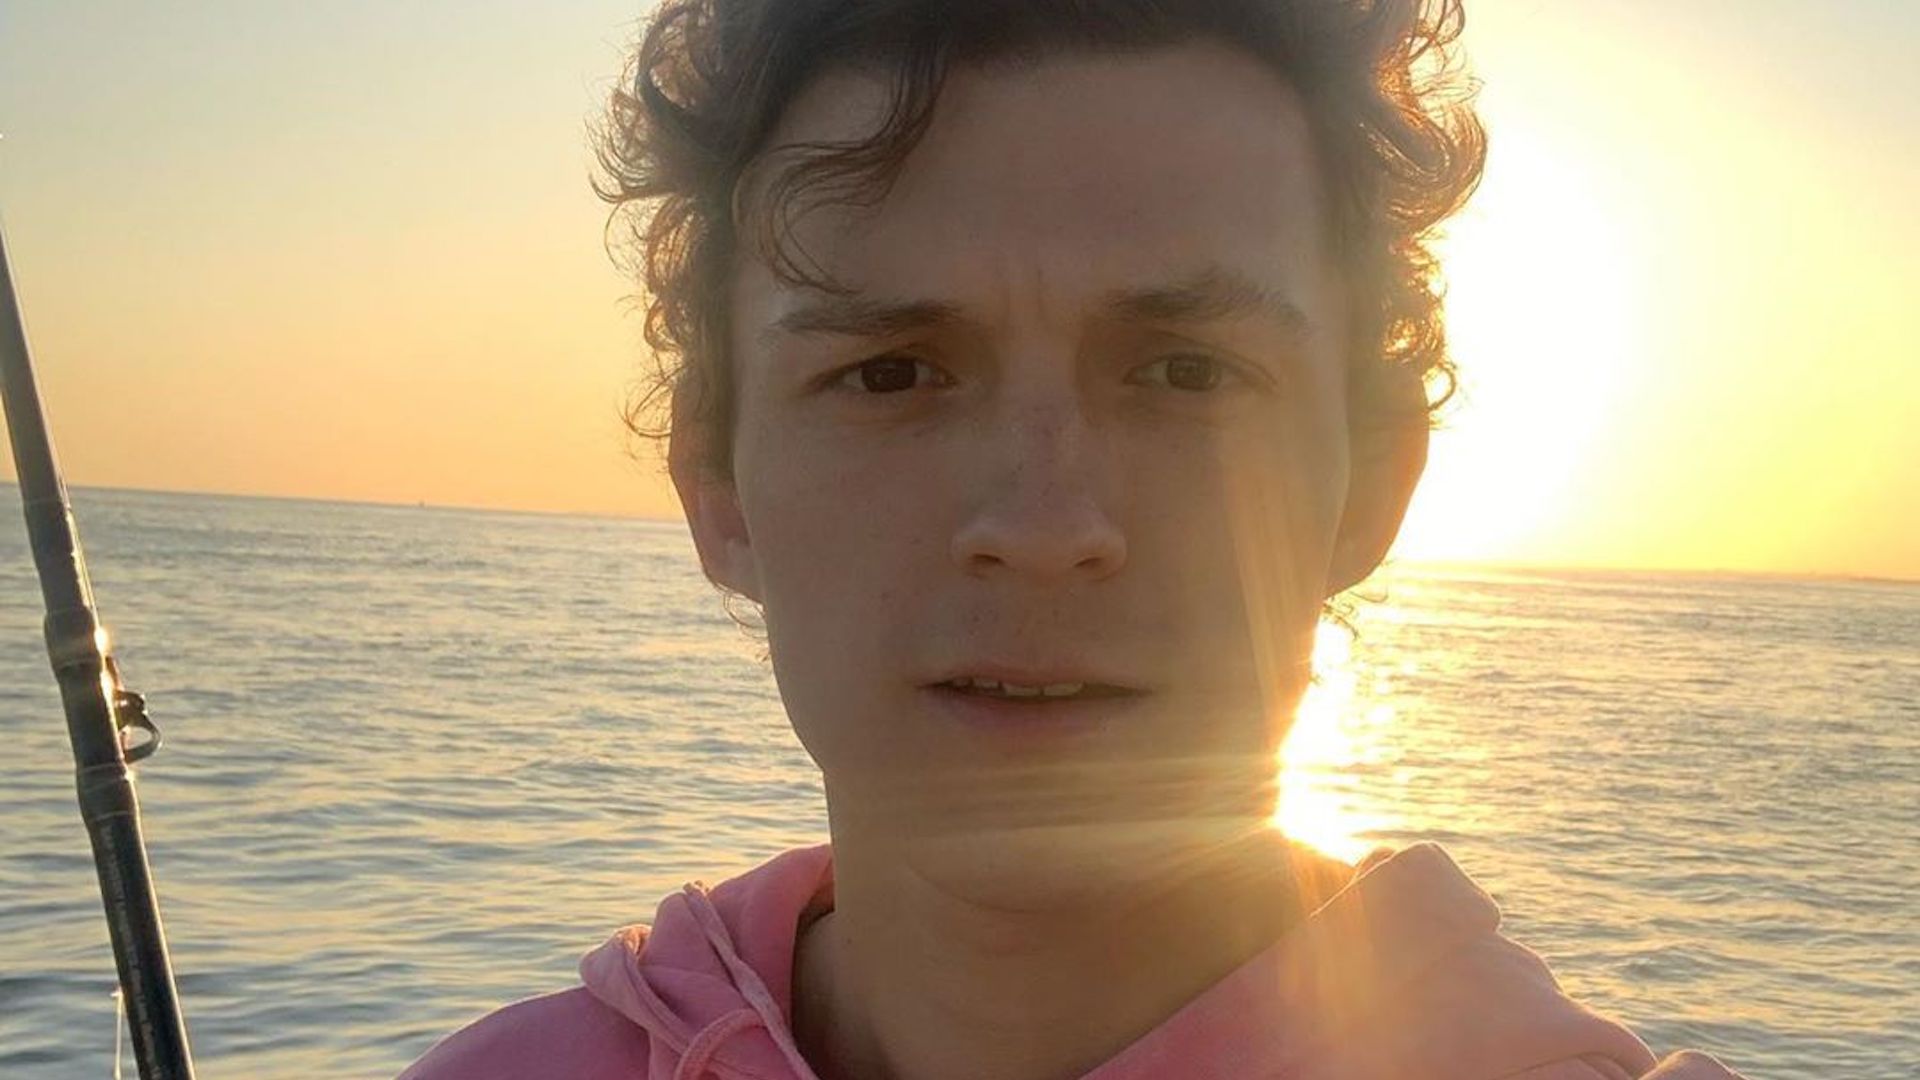 Tom Holland taking a selfie against a sunset